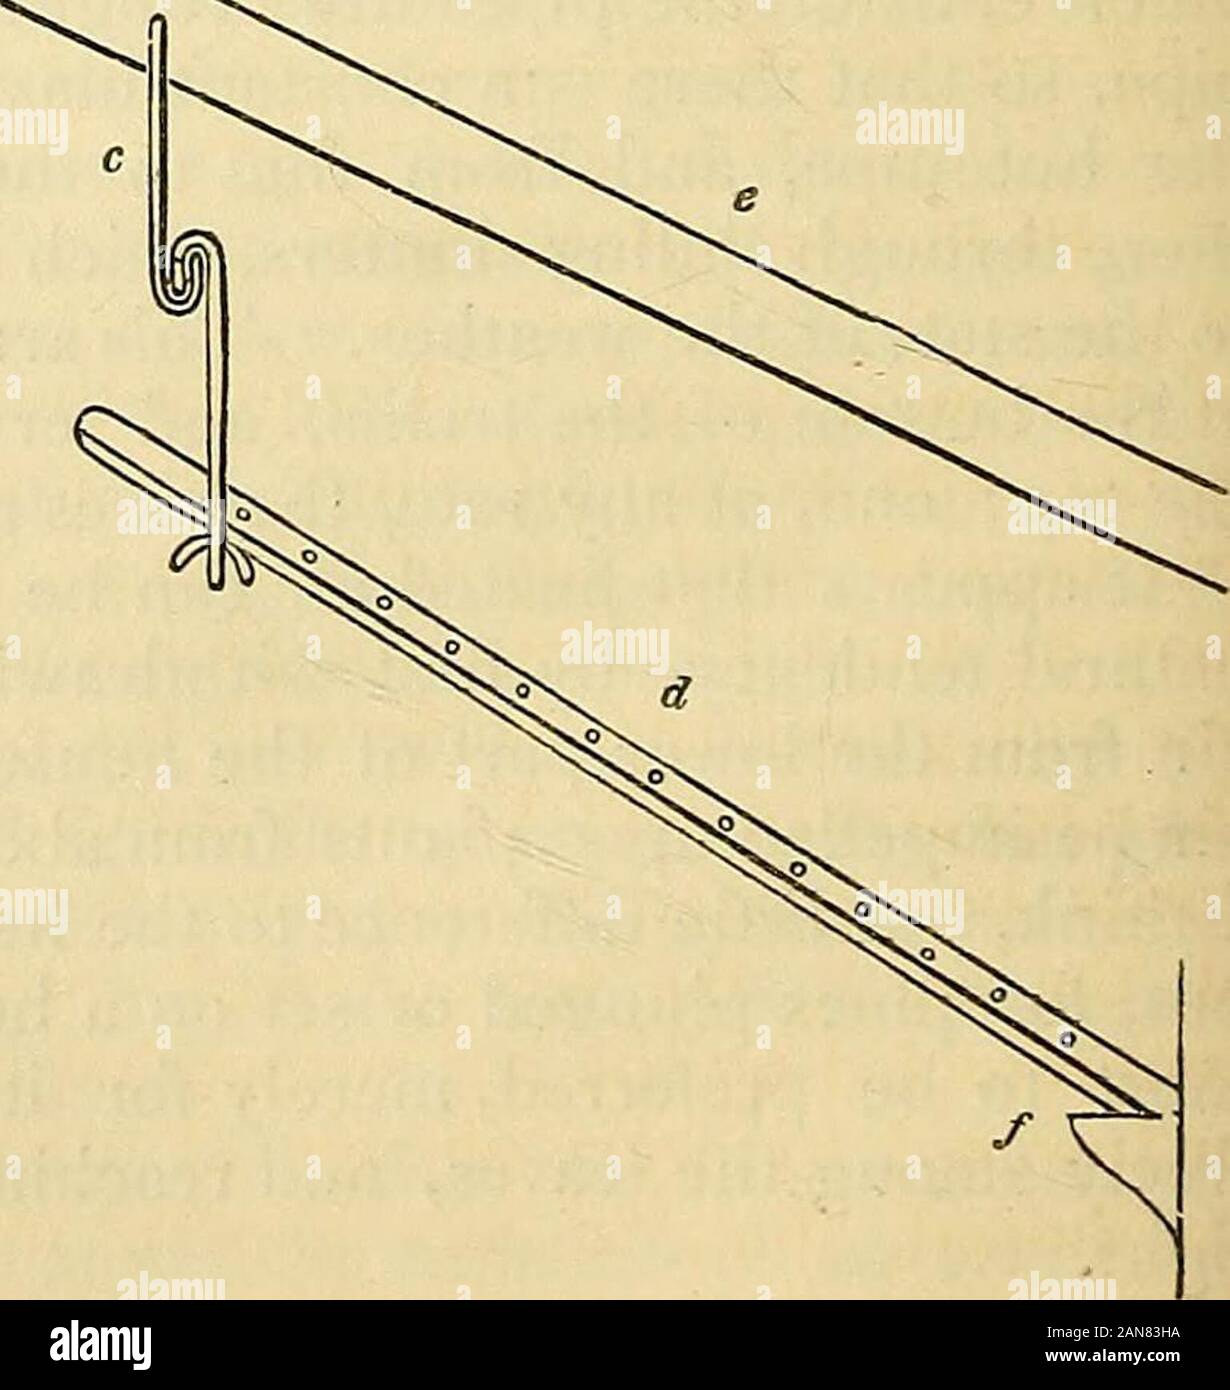 The gardener's magazine and register of rural & domestic improvement . Fig. 28. Ladder for thinning Grapes. Fig. 29. Section of the horixontal Rodof the Sliding Ladder. ..^ ^ Inj%. 28., a a represents a f-inch iron rod, which reaches fromone end of the vinery to the other, suspended about 2 ft. fromthe rafters by iron rods ^-v,^,^^ J J, h, which rods have ^^^ turned up ends to supportthe horizontal rod in themanner shown in the sec-tions, ^^5. 29. and 30. ; c,irons to hang on the rod tosupport the ladder, alsoshown in the section at c ;d, the ladder; e, the rafter;f, part of the sill of thefro Stock Photo